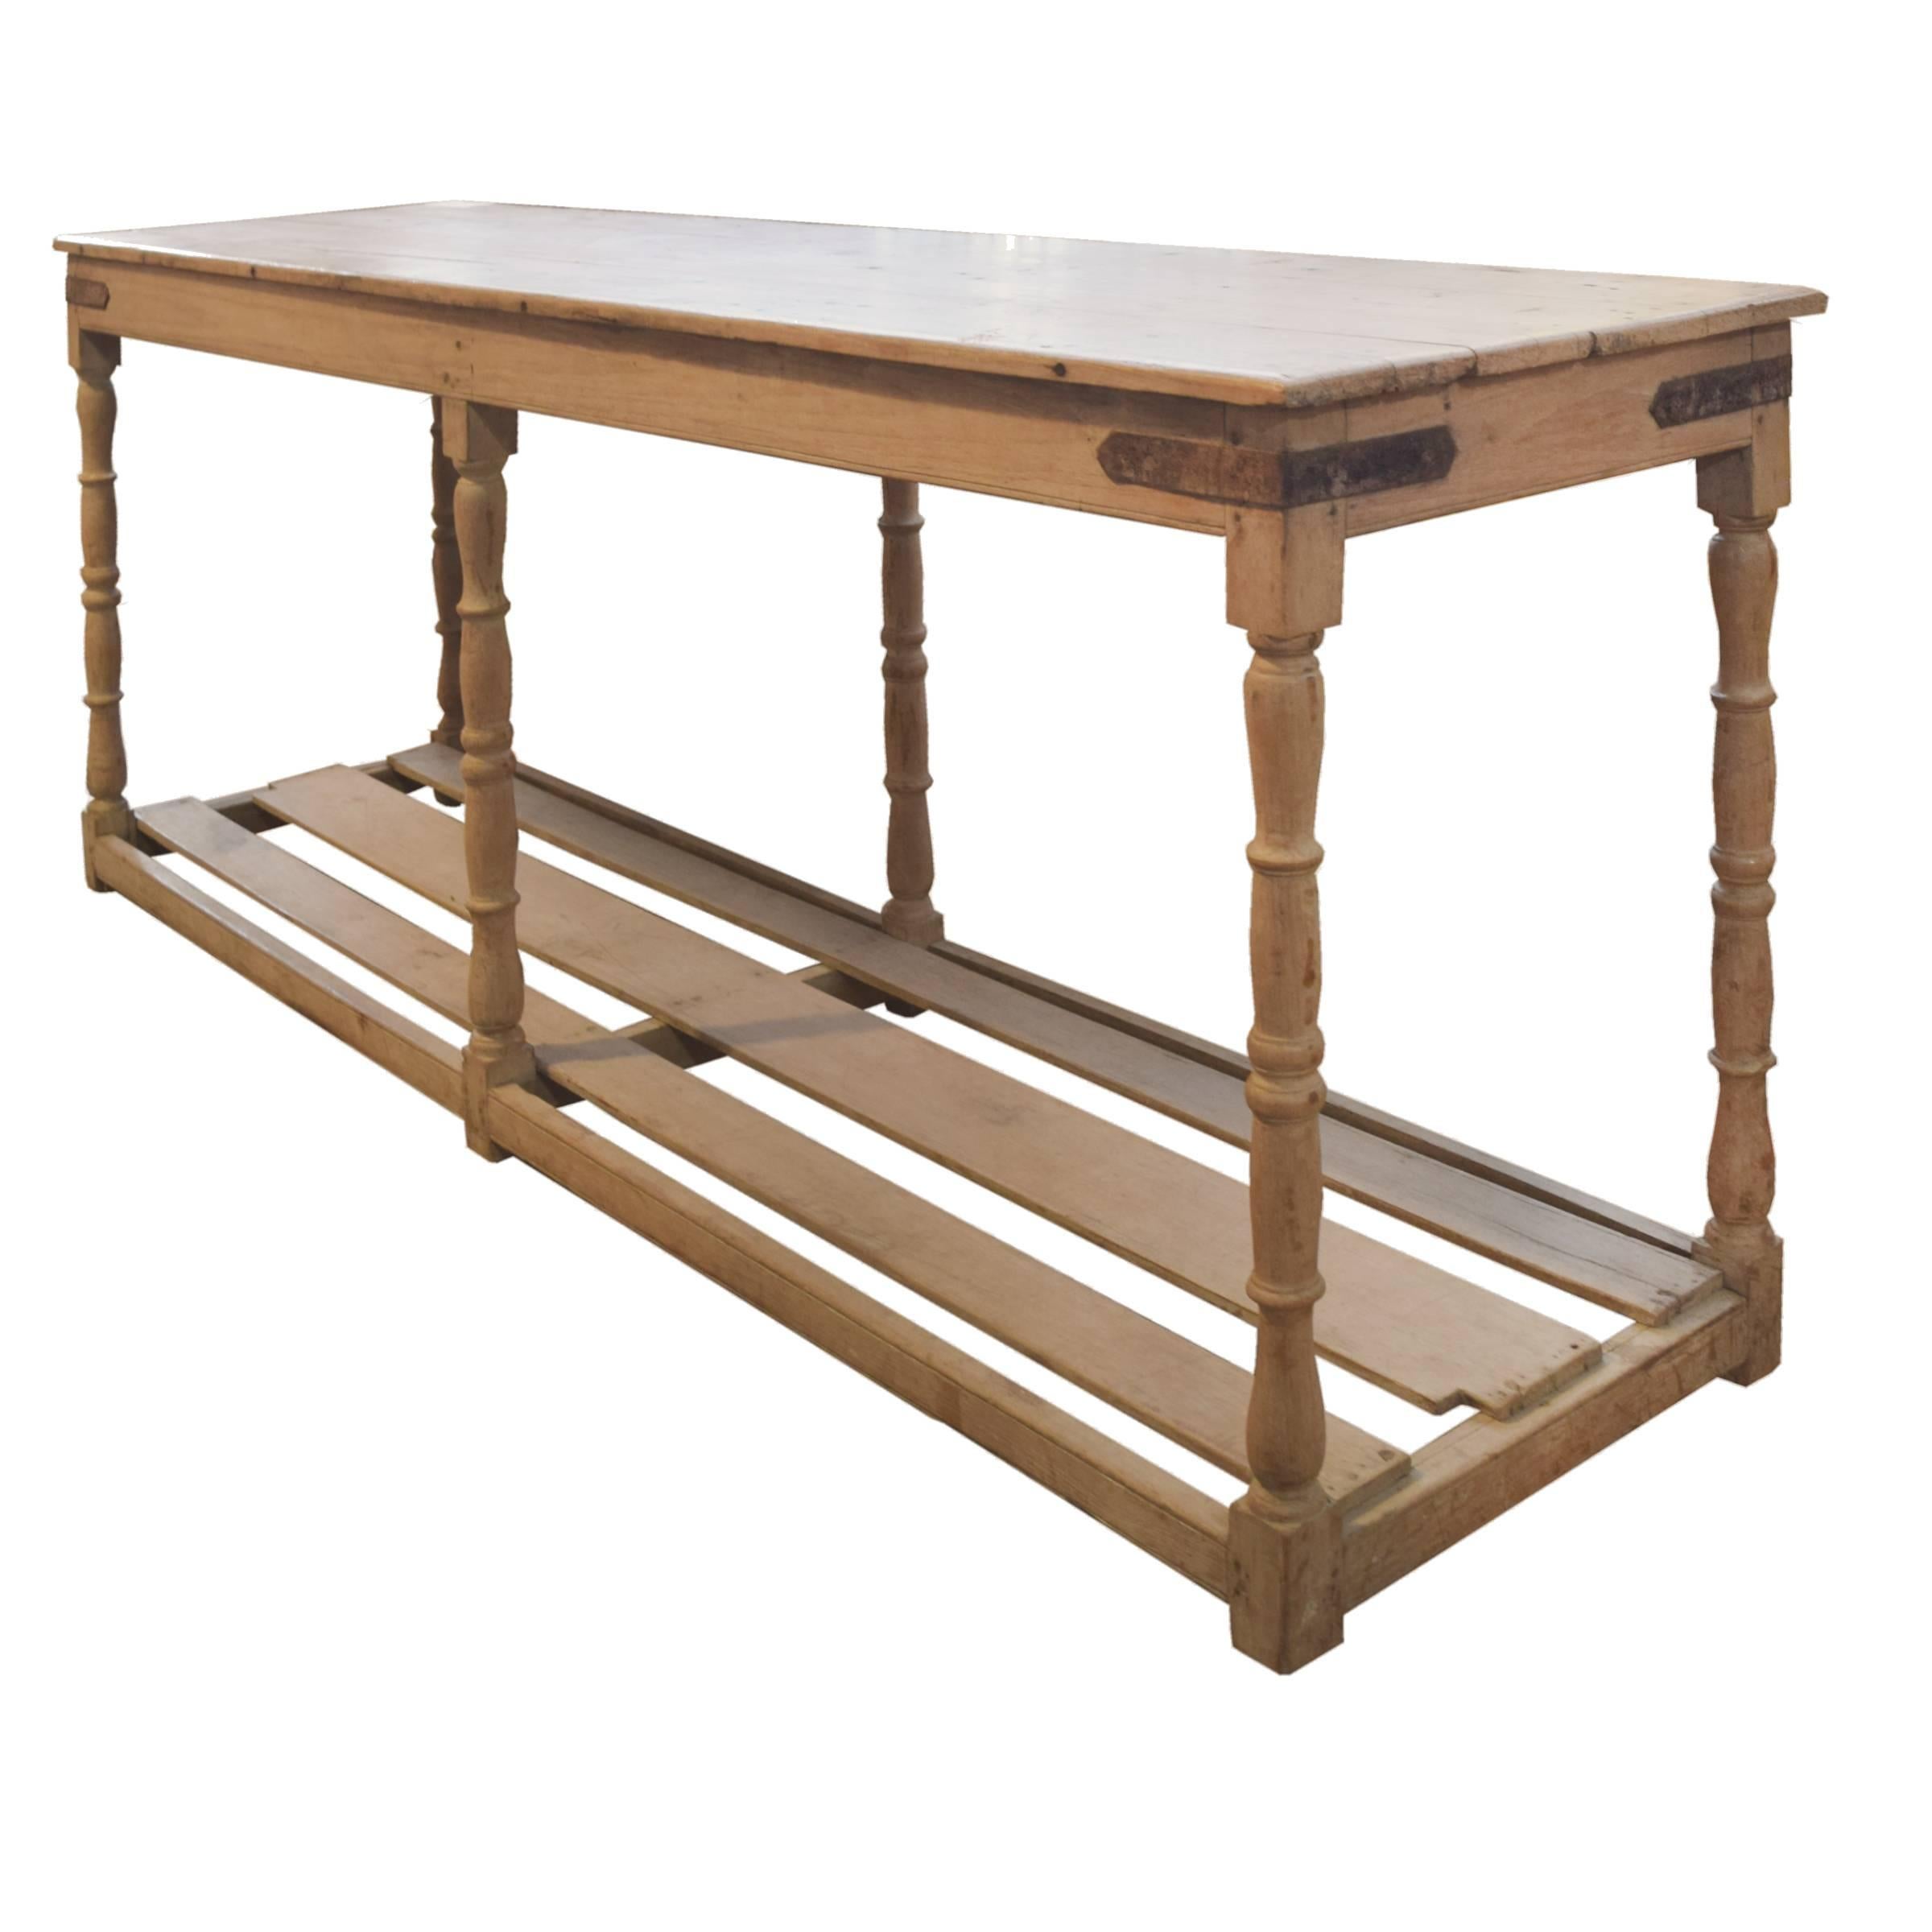 A great French wood draper's table with iron corner details, six turned legs, and a slatted shelf at the bottom, circa 1900.